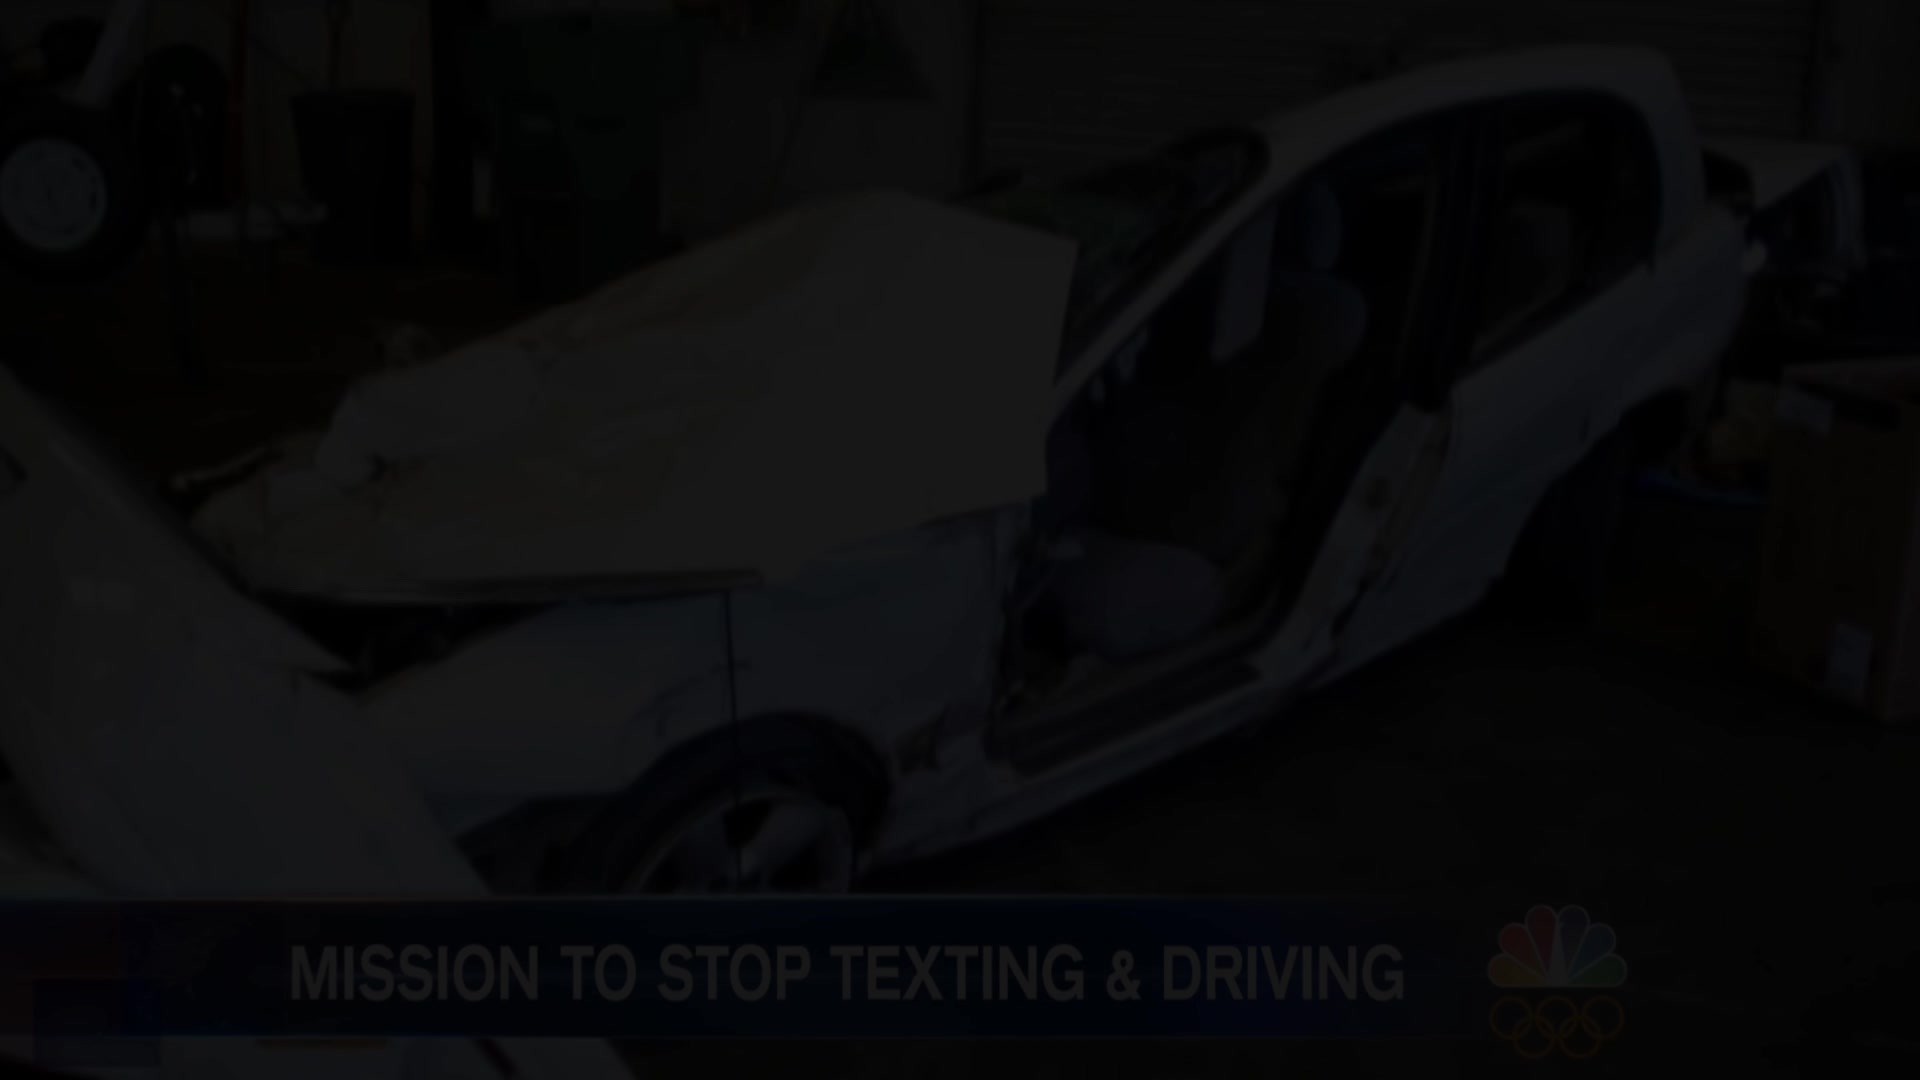 The Face of Distracted Driving